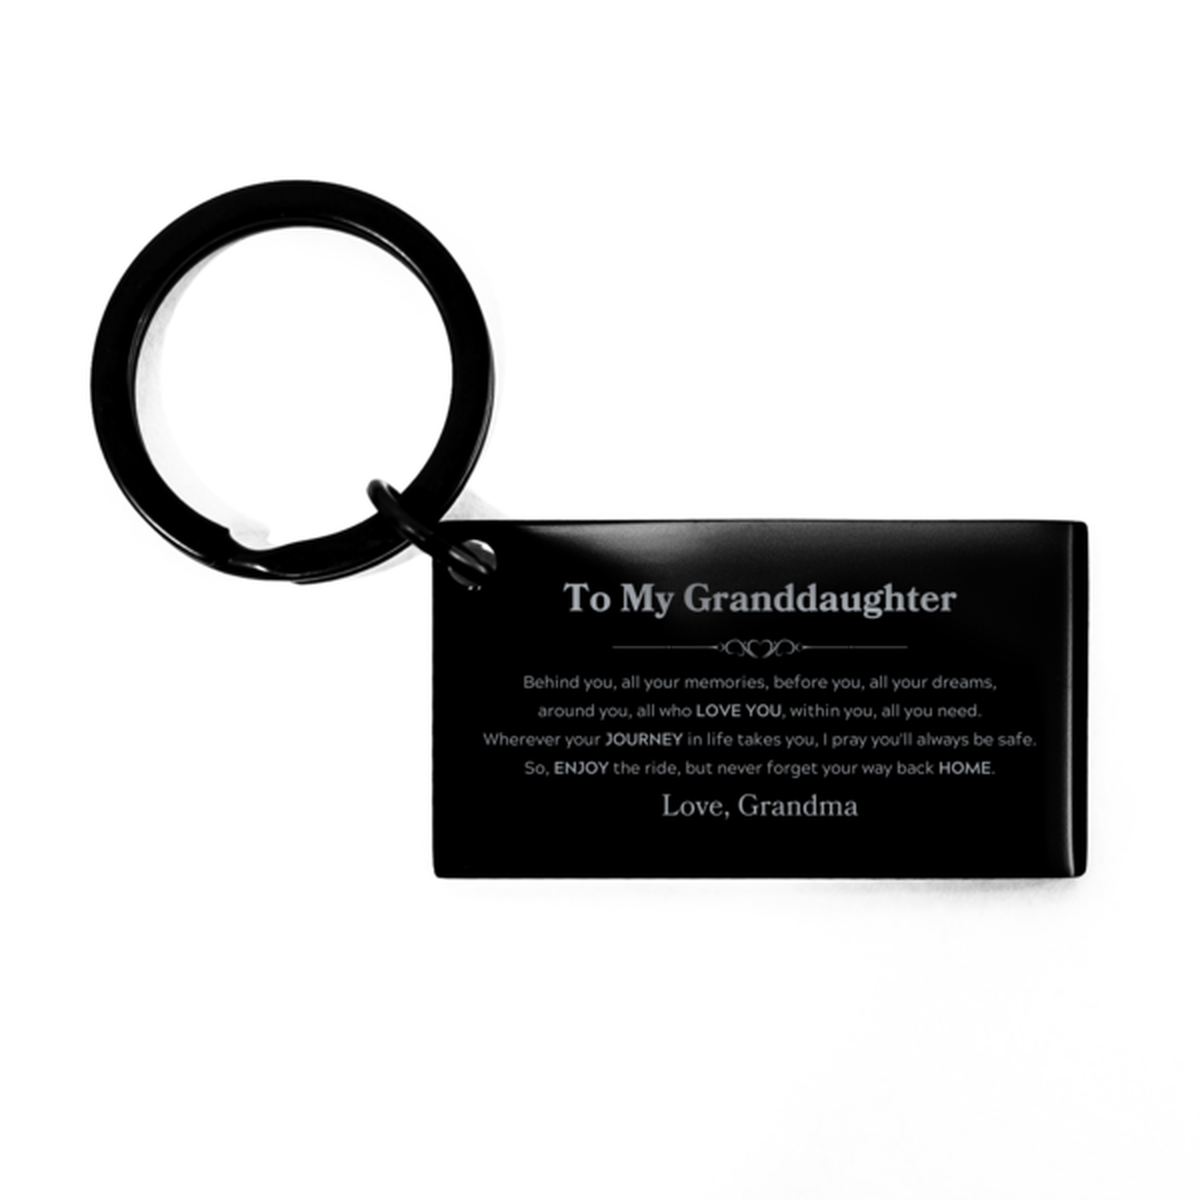 To My Granddaughter Graduation Gifts from Grandma, Granddaughter Keychain Christmas Birthday Gifts for Granddaughter Behind you, all your memories, before you, all your dreams. Love, Grandma